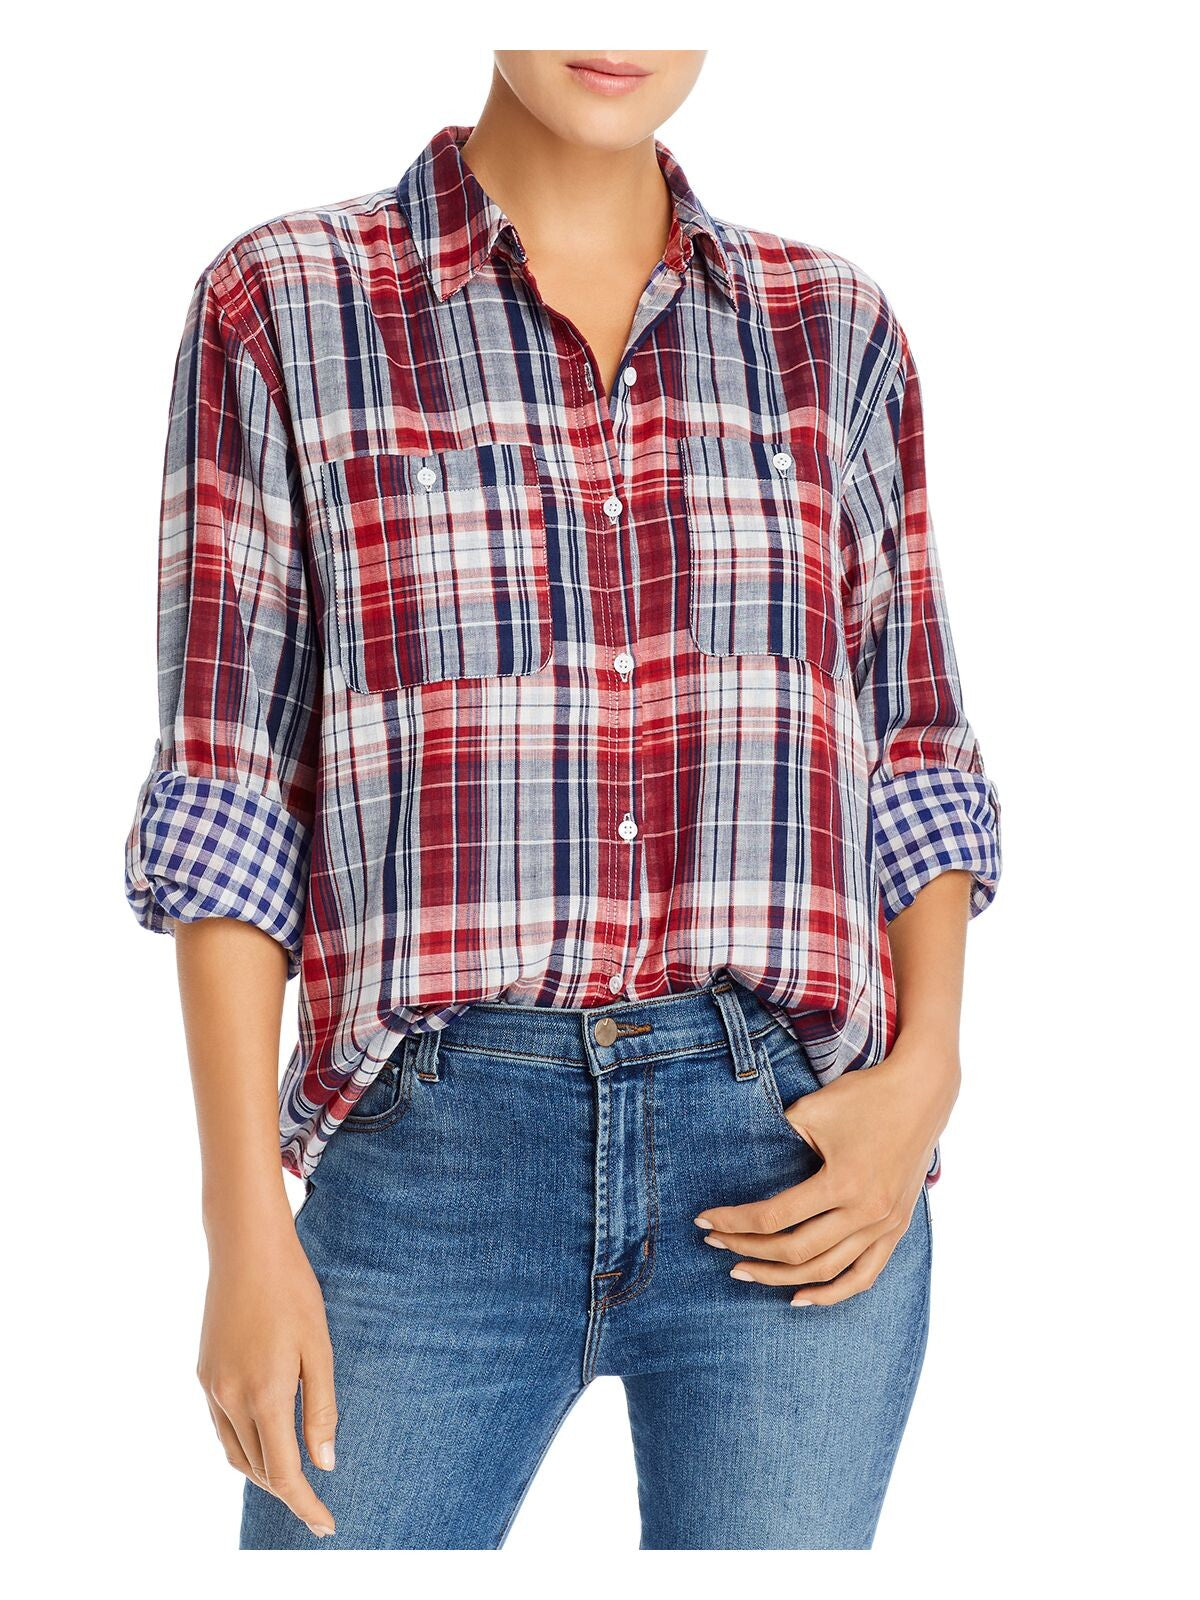 JOIE Womens Red Plaid Cuffed Collared Button Up Top 2XS